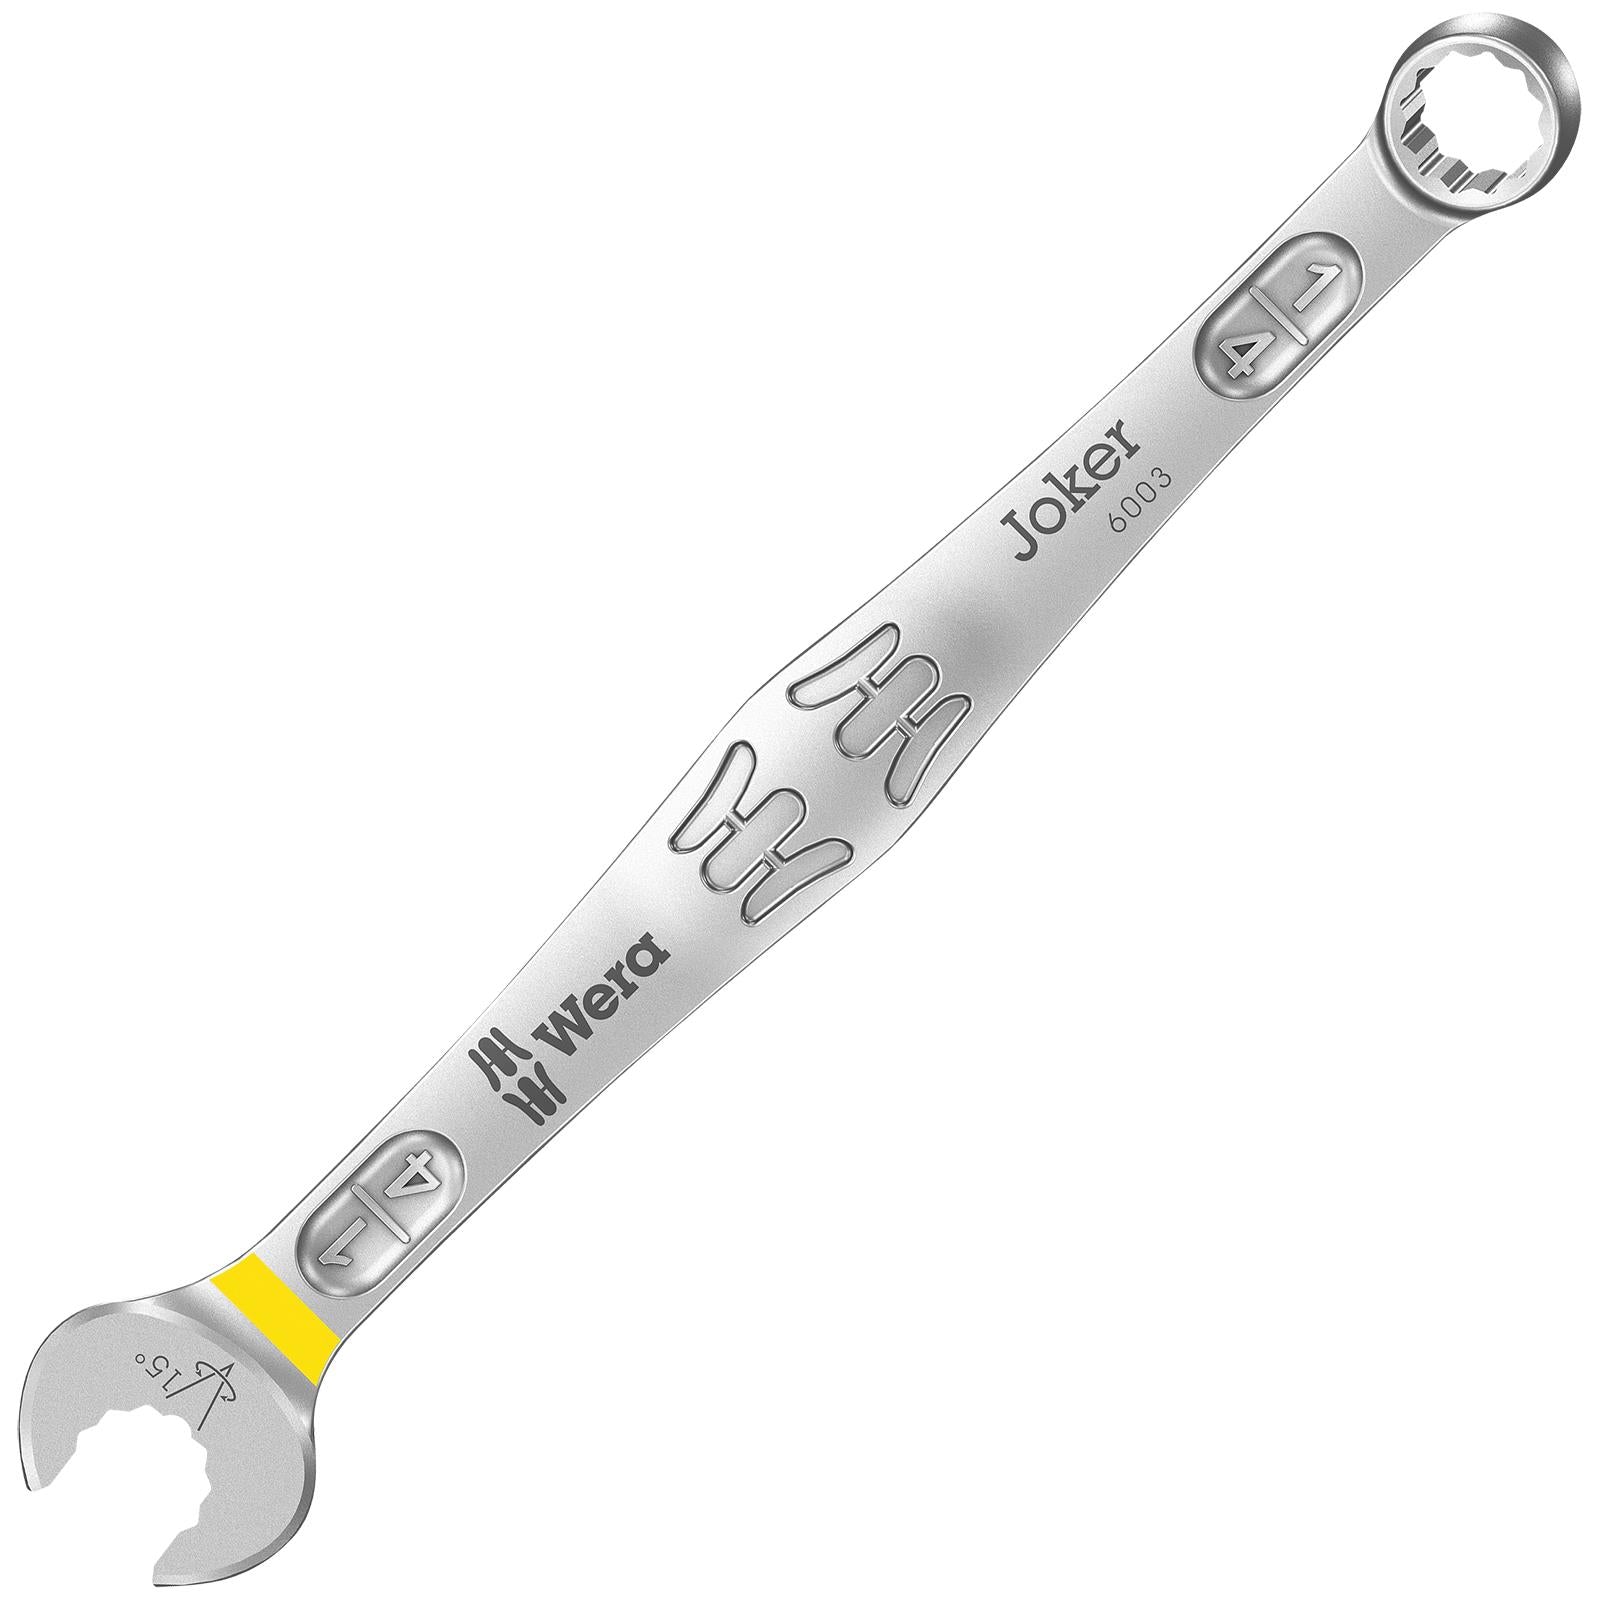 Wera 6003 Joker Combination Spanner Wrench Open End Ring Imperial